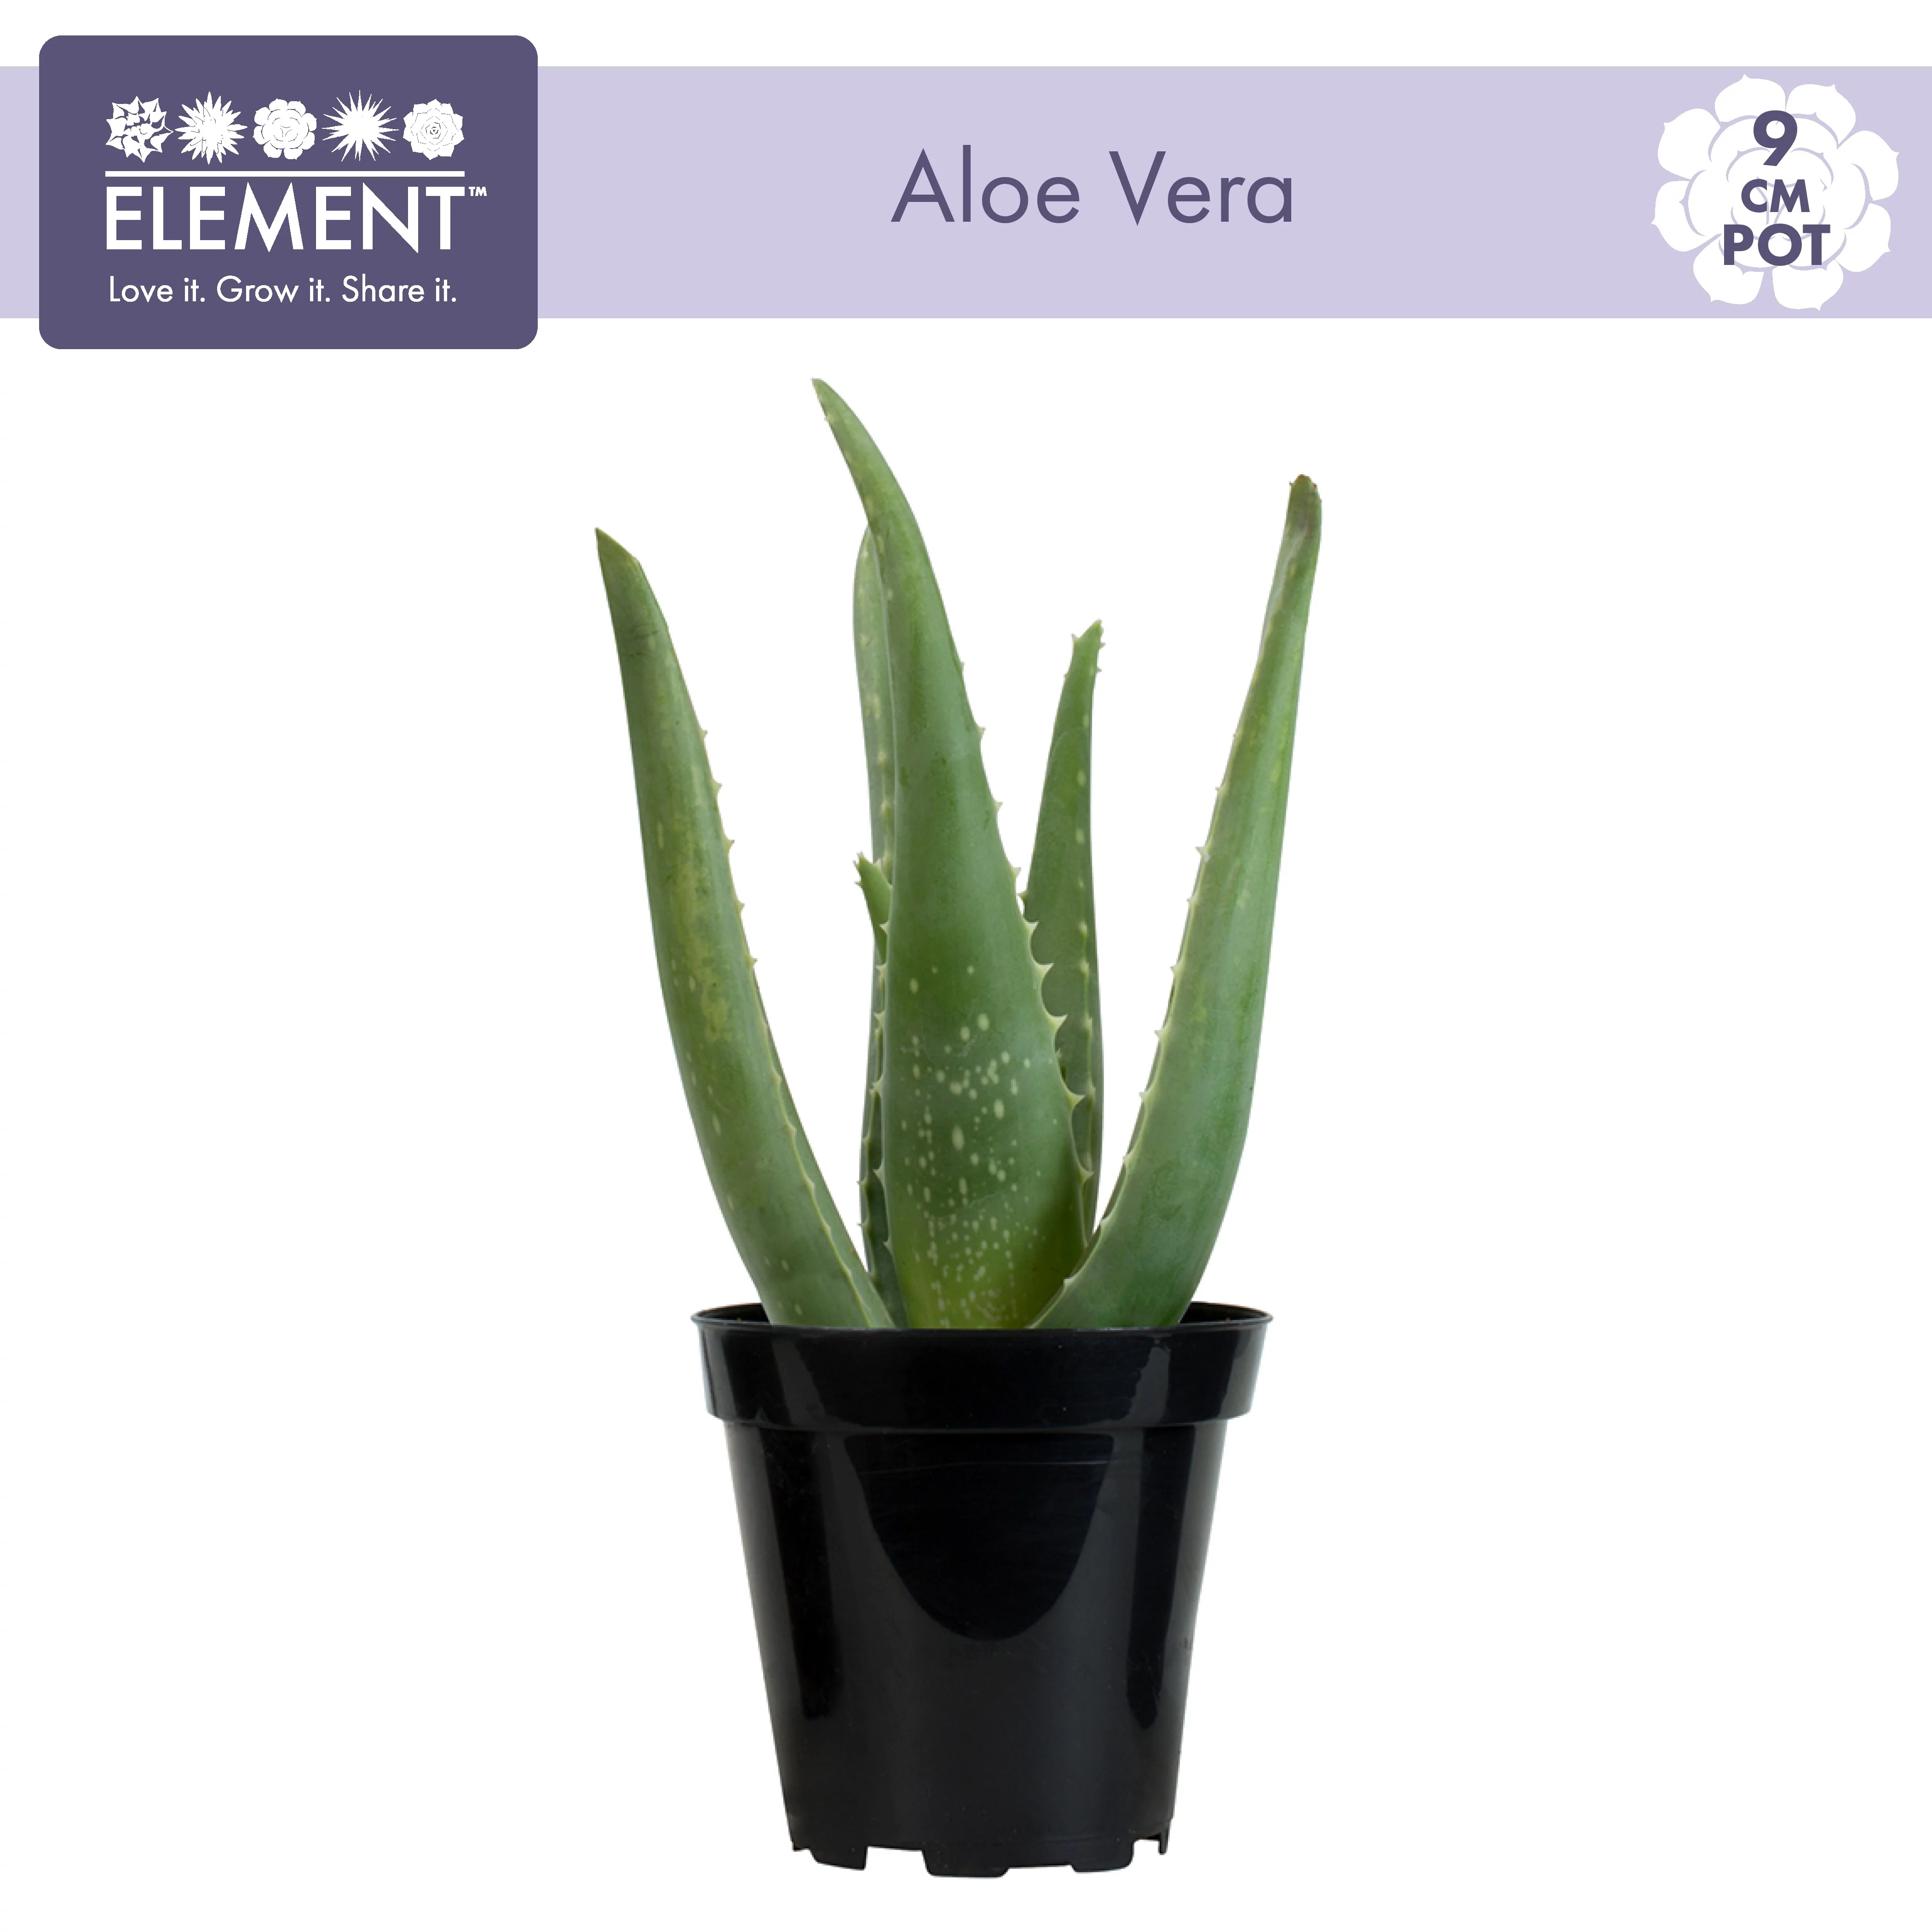 Element by Altman Plants Aloe Vera Succulent , Live Indoor House Plant with Grower Pot, 3.5 Inch